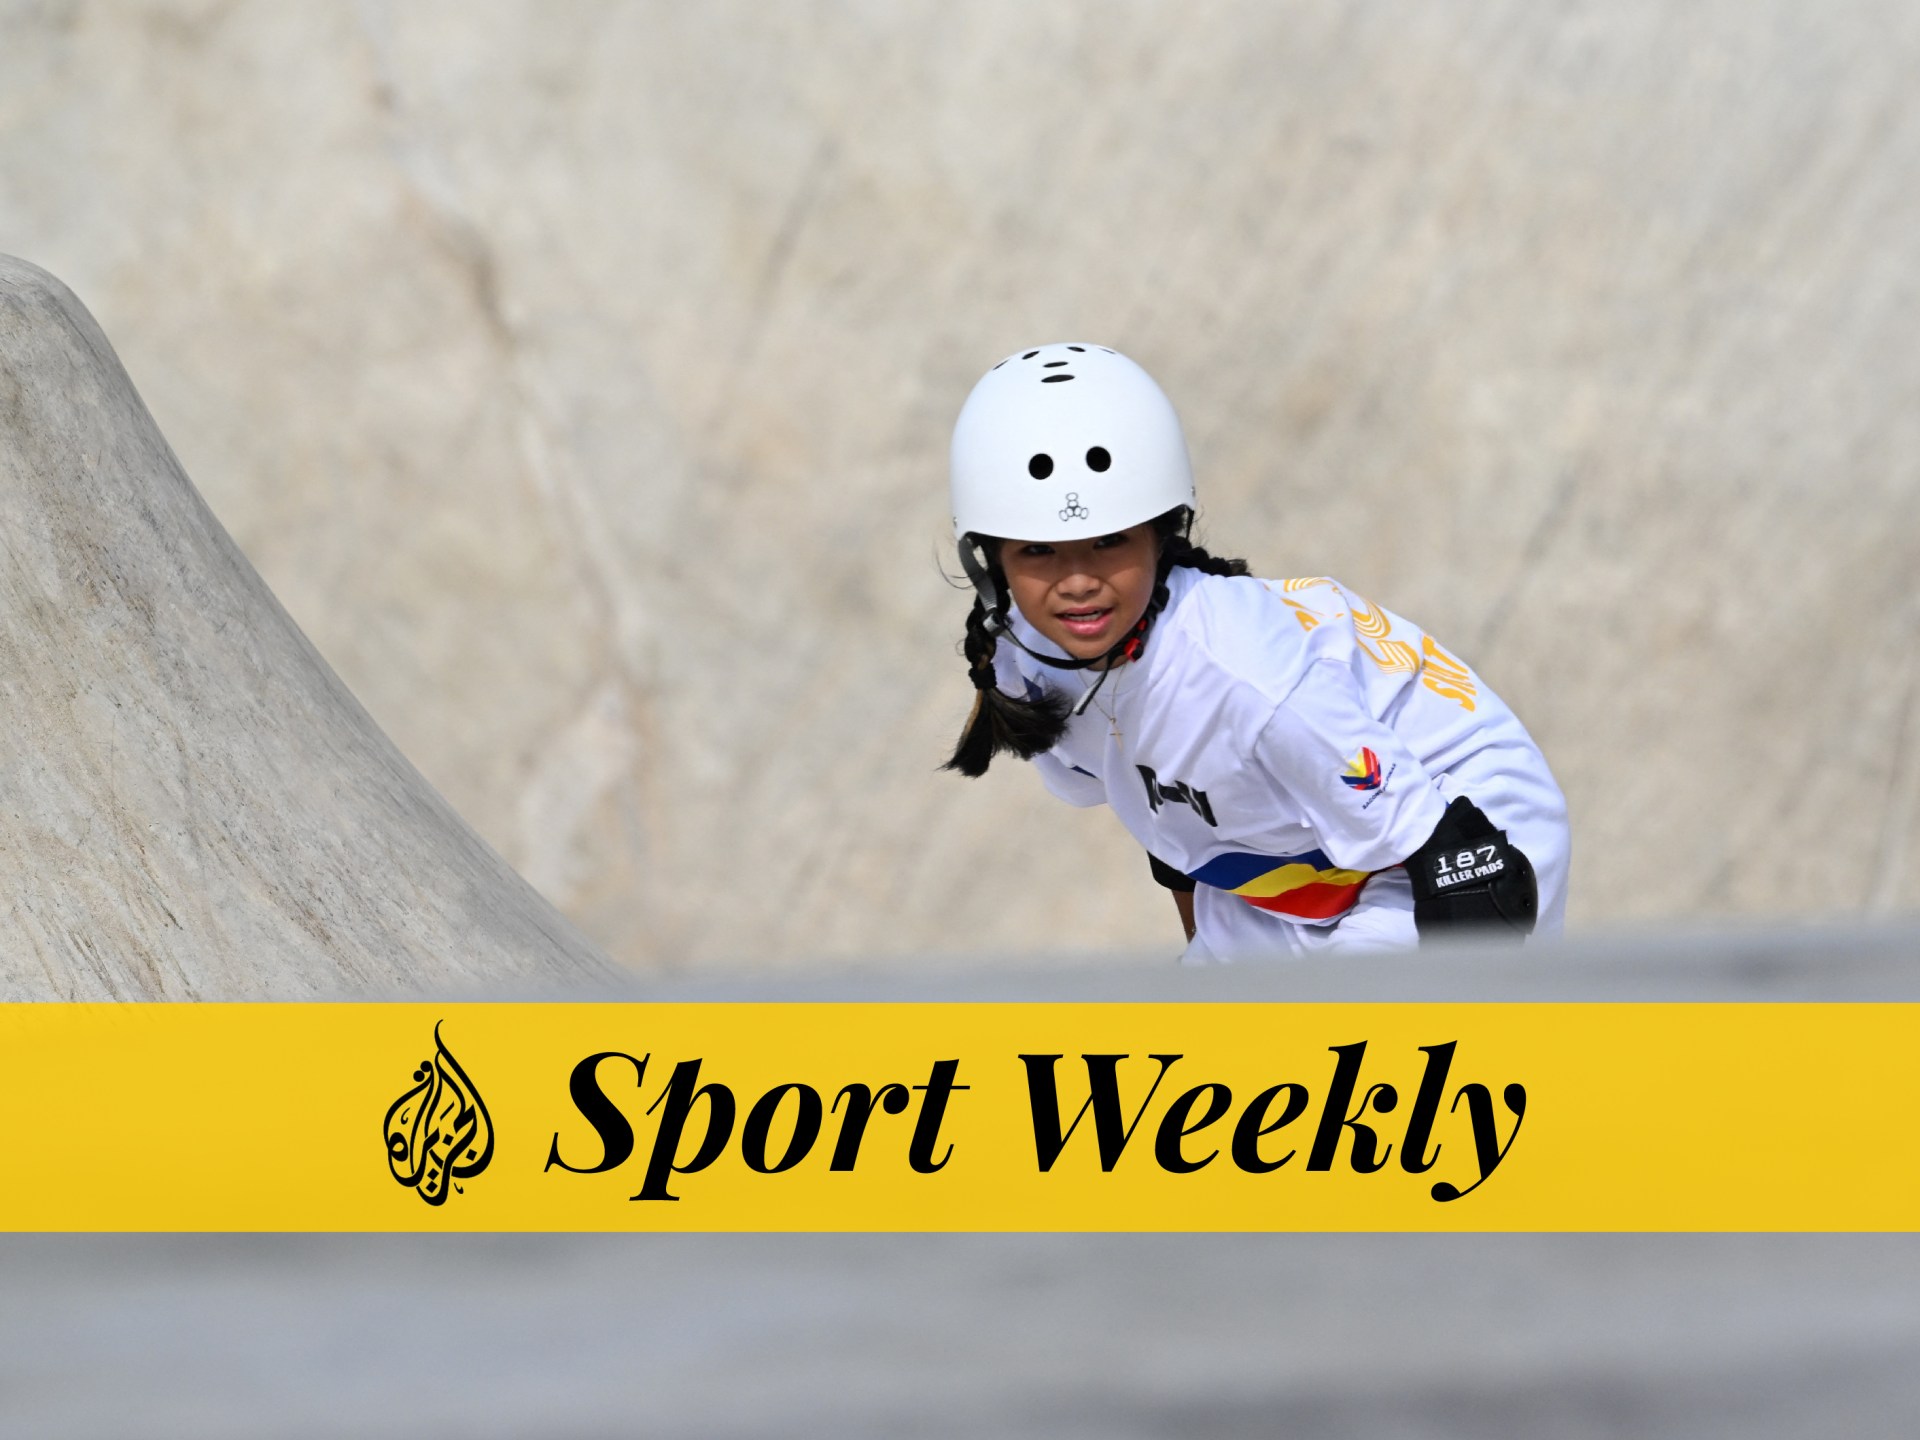 Sport Weekly: Child athletes on the joys and the perils of competing | Sports News #Sport #Weekly #Child #athletes #joys #perils #competing #Sports #News